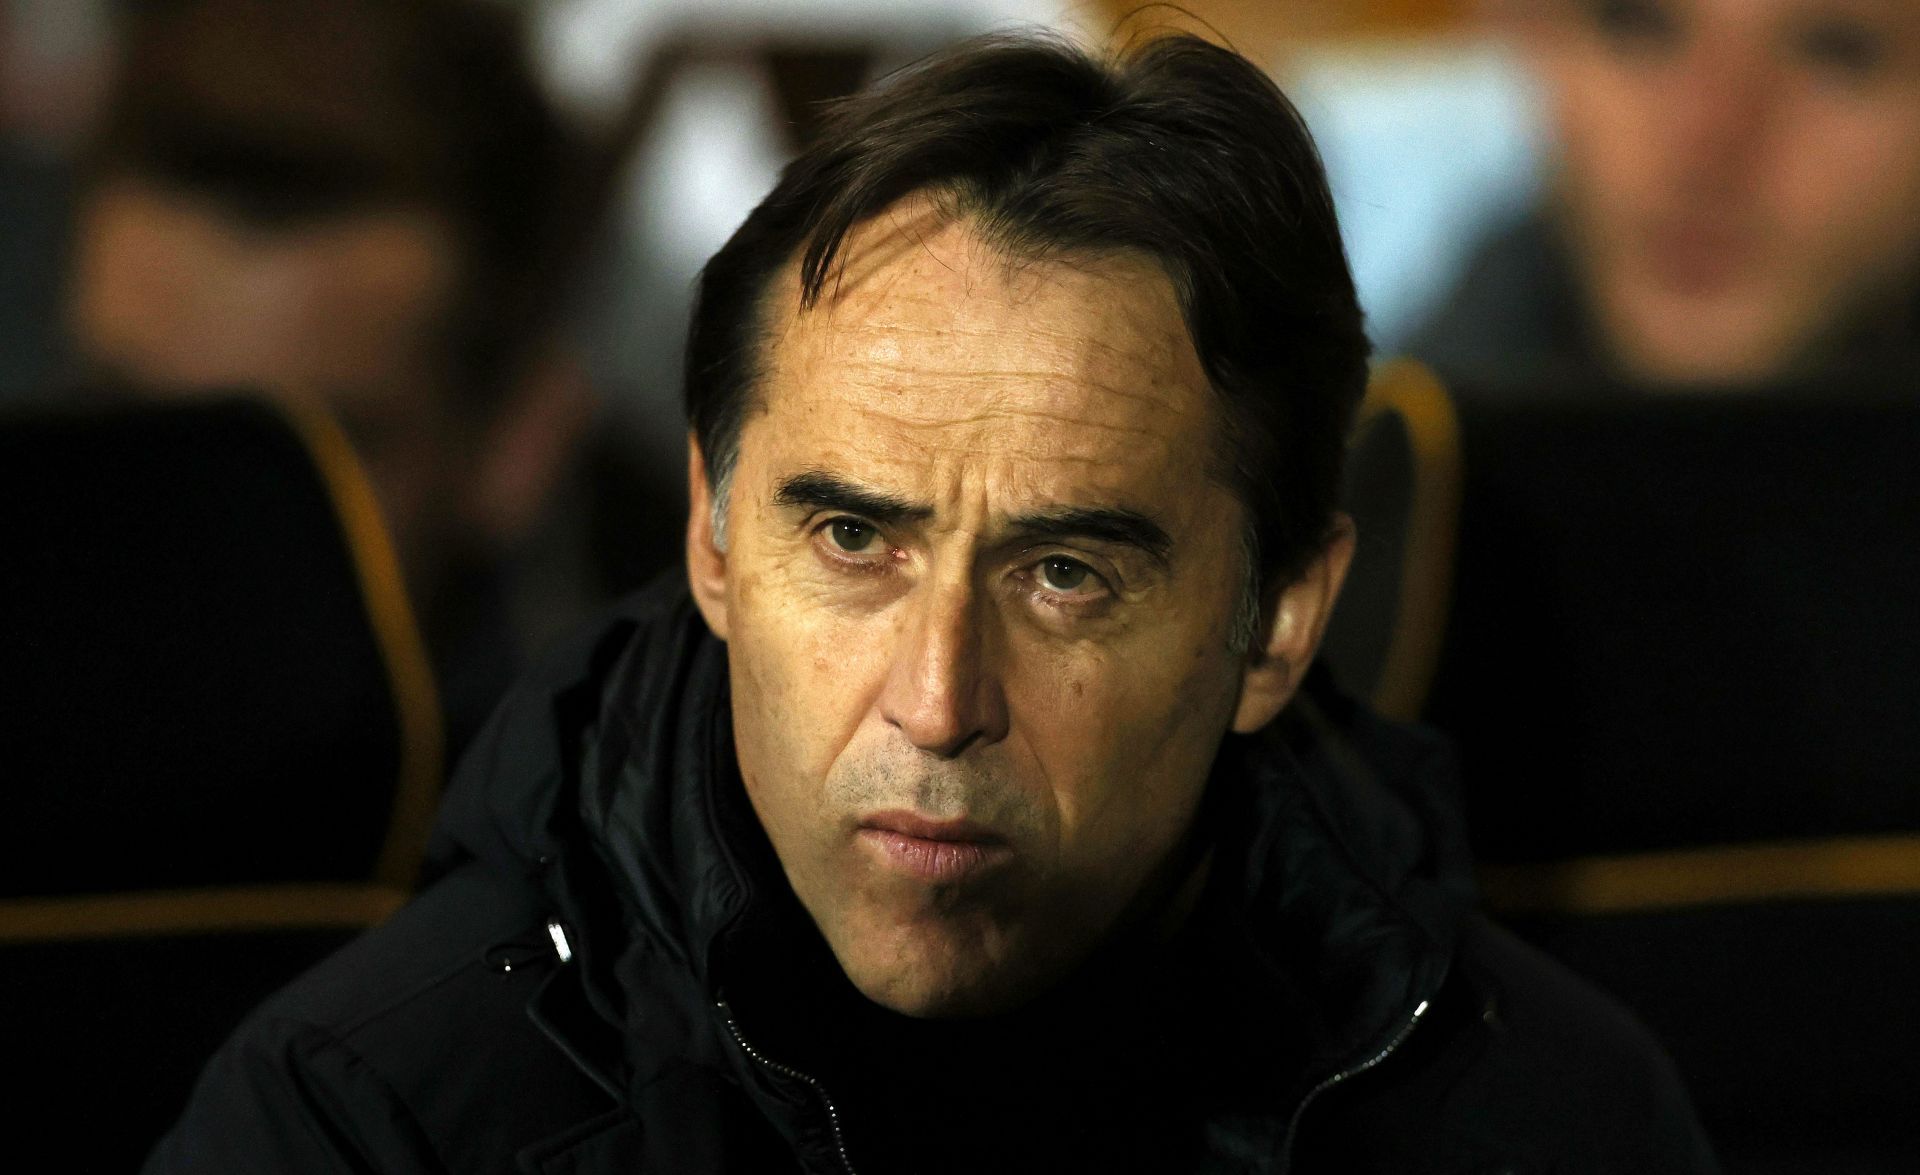 Julen Lopetegui oversaw a 2-0 win over Gillingham in the EFL Cup in his managerial bow with Wolves 